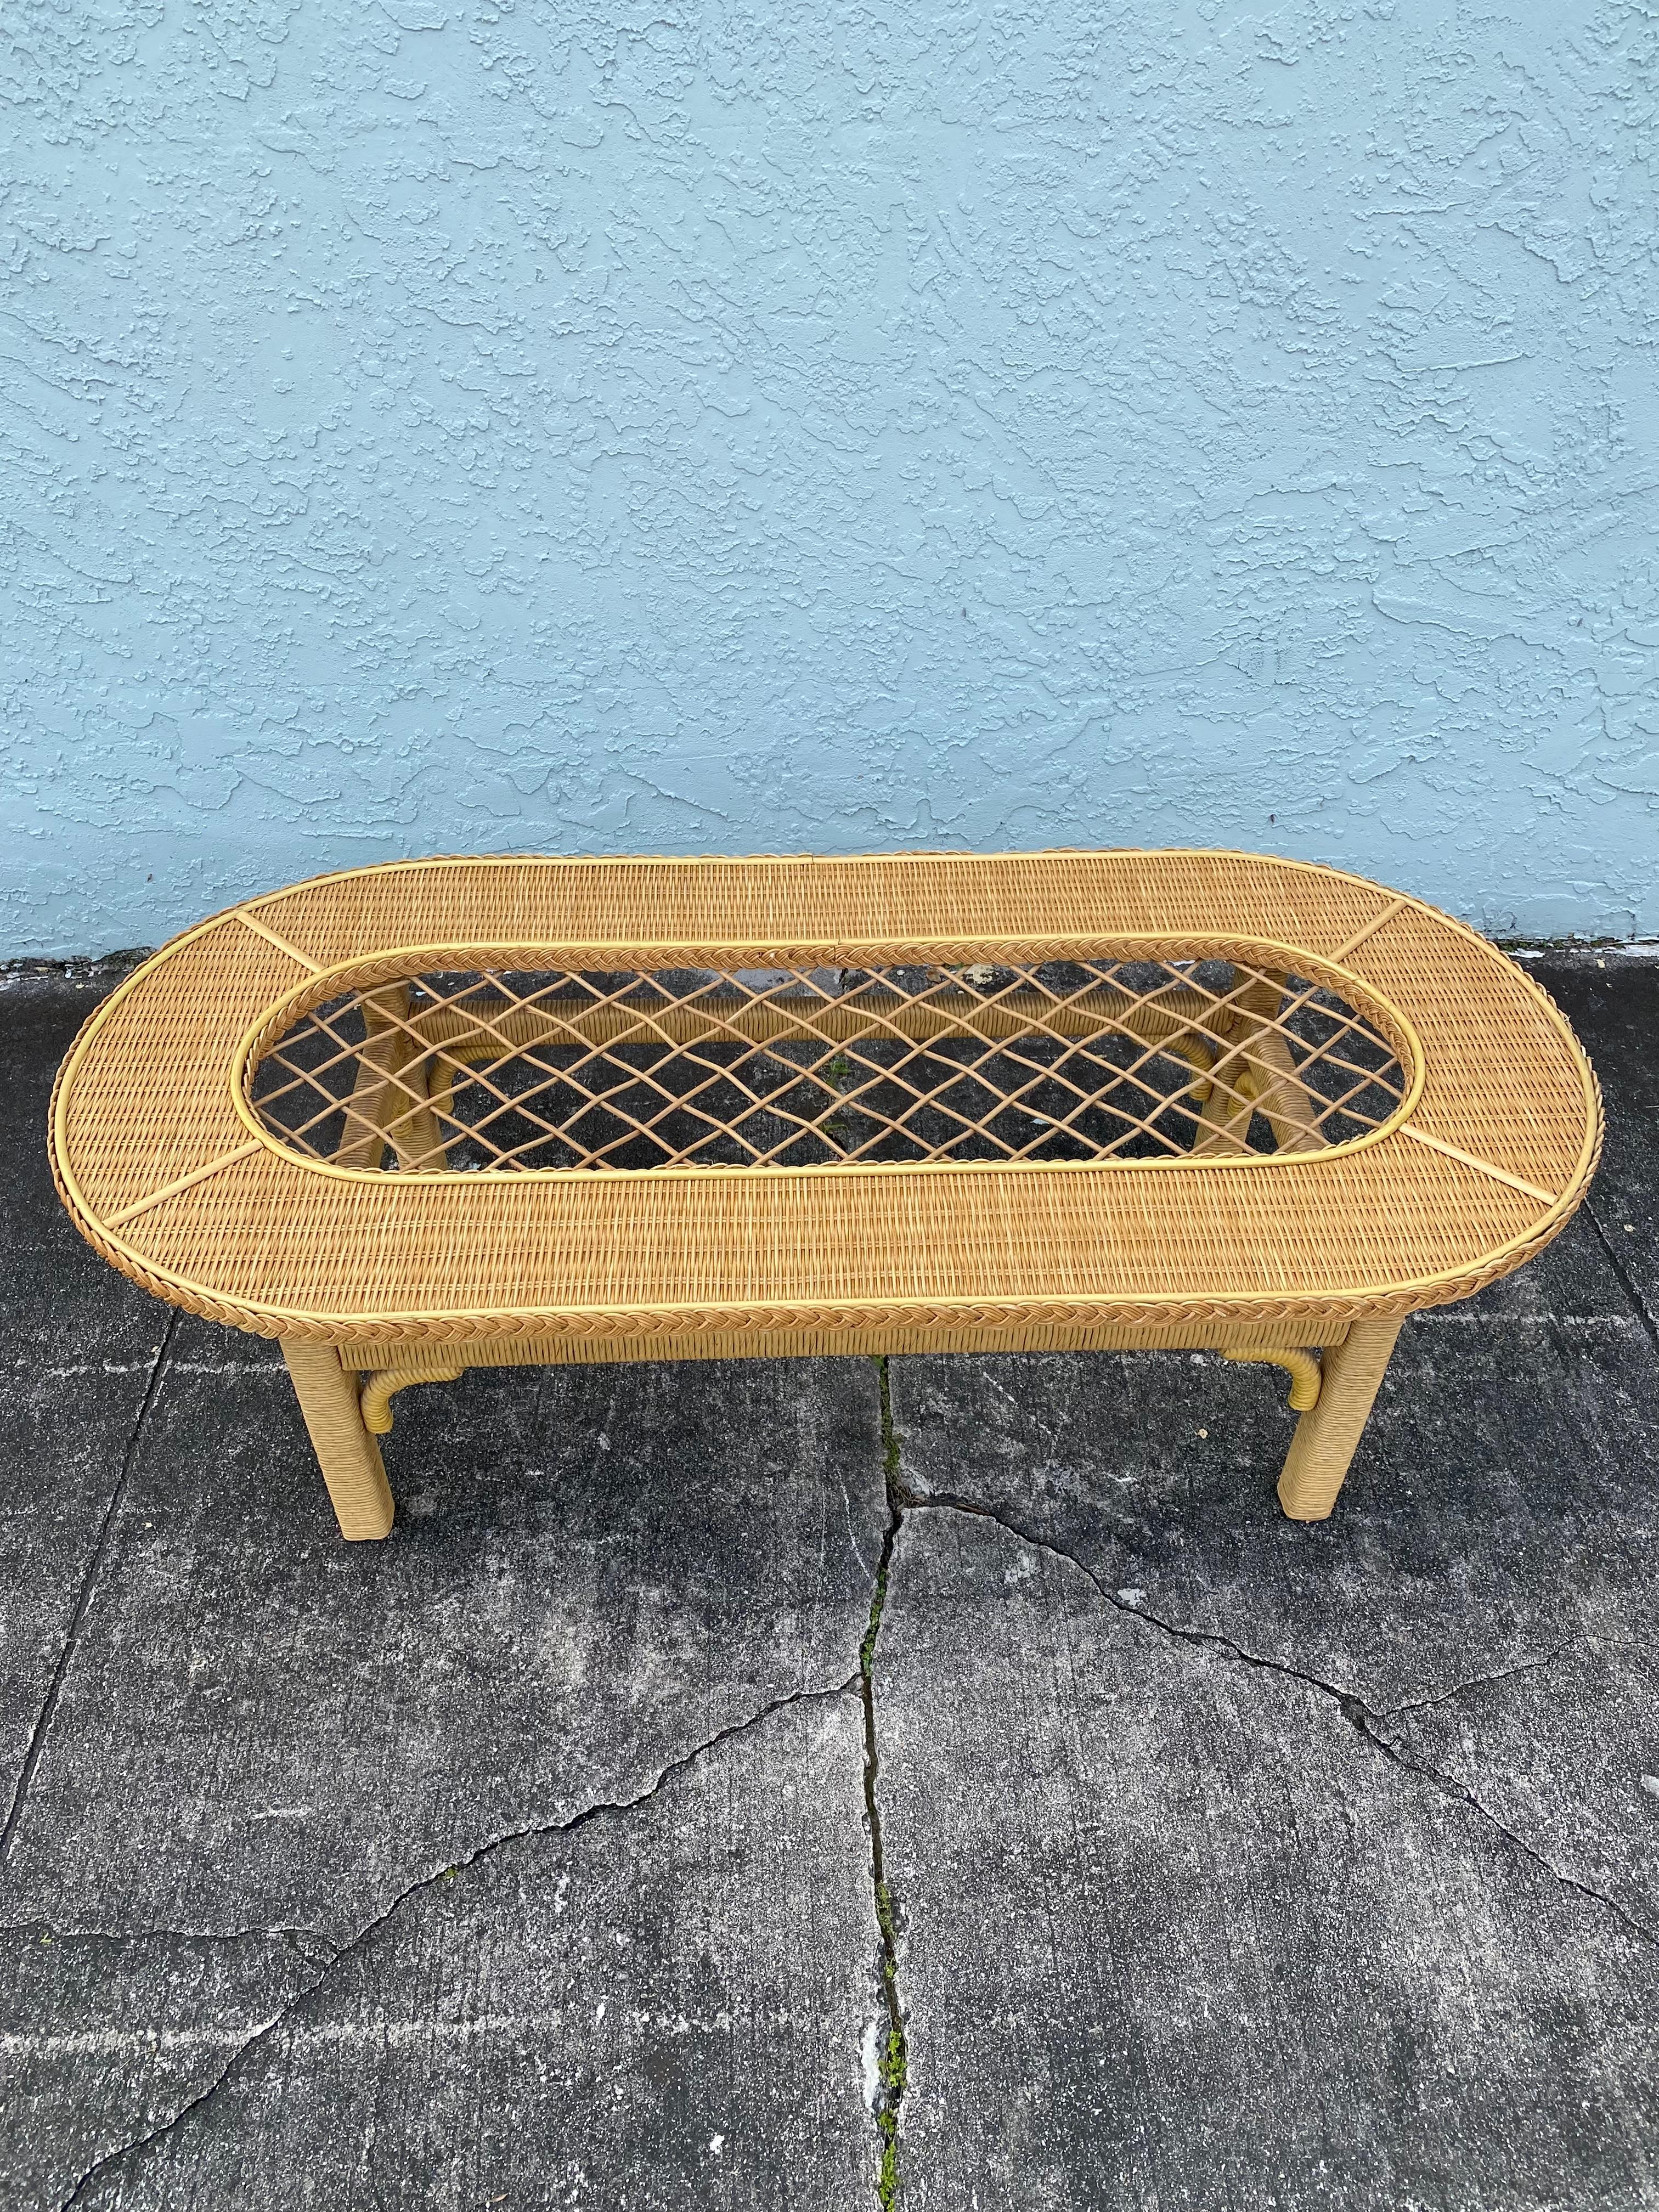 Lacquer 1960s Oval Rattan Braided Wicker Lattice Glass Coffee Table For Sale